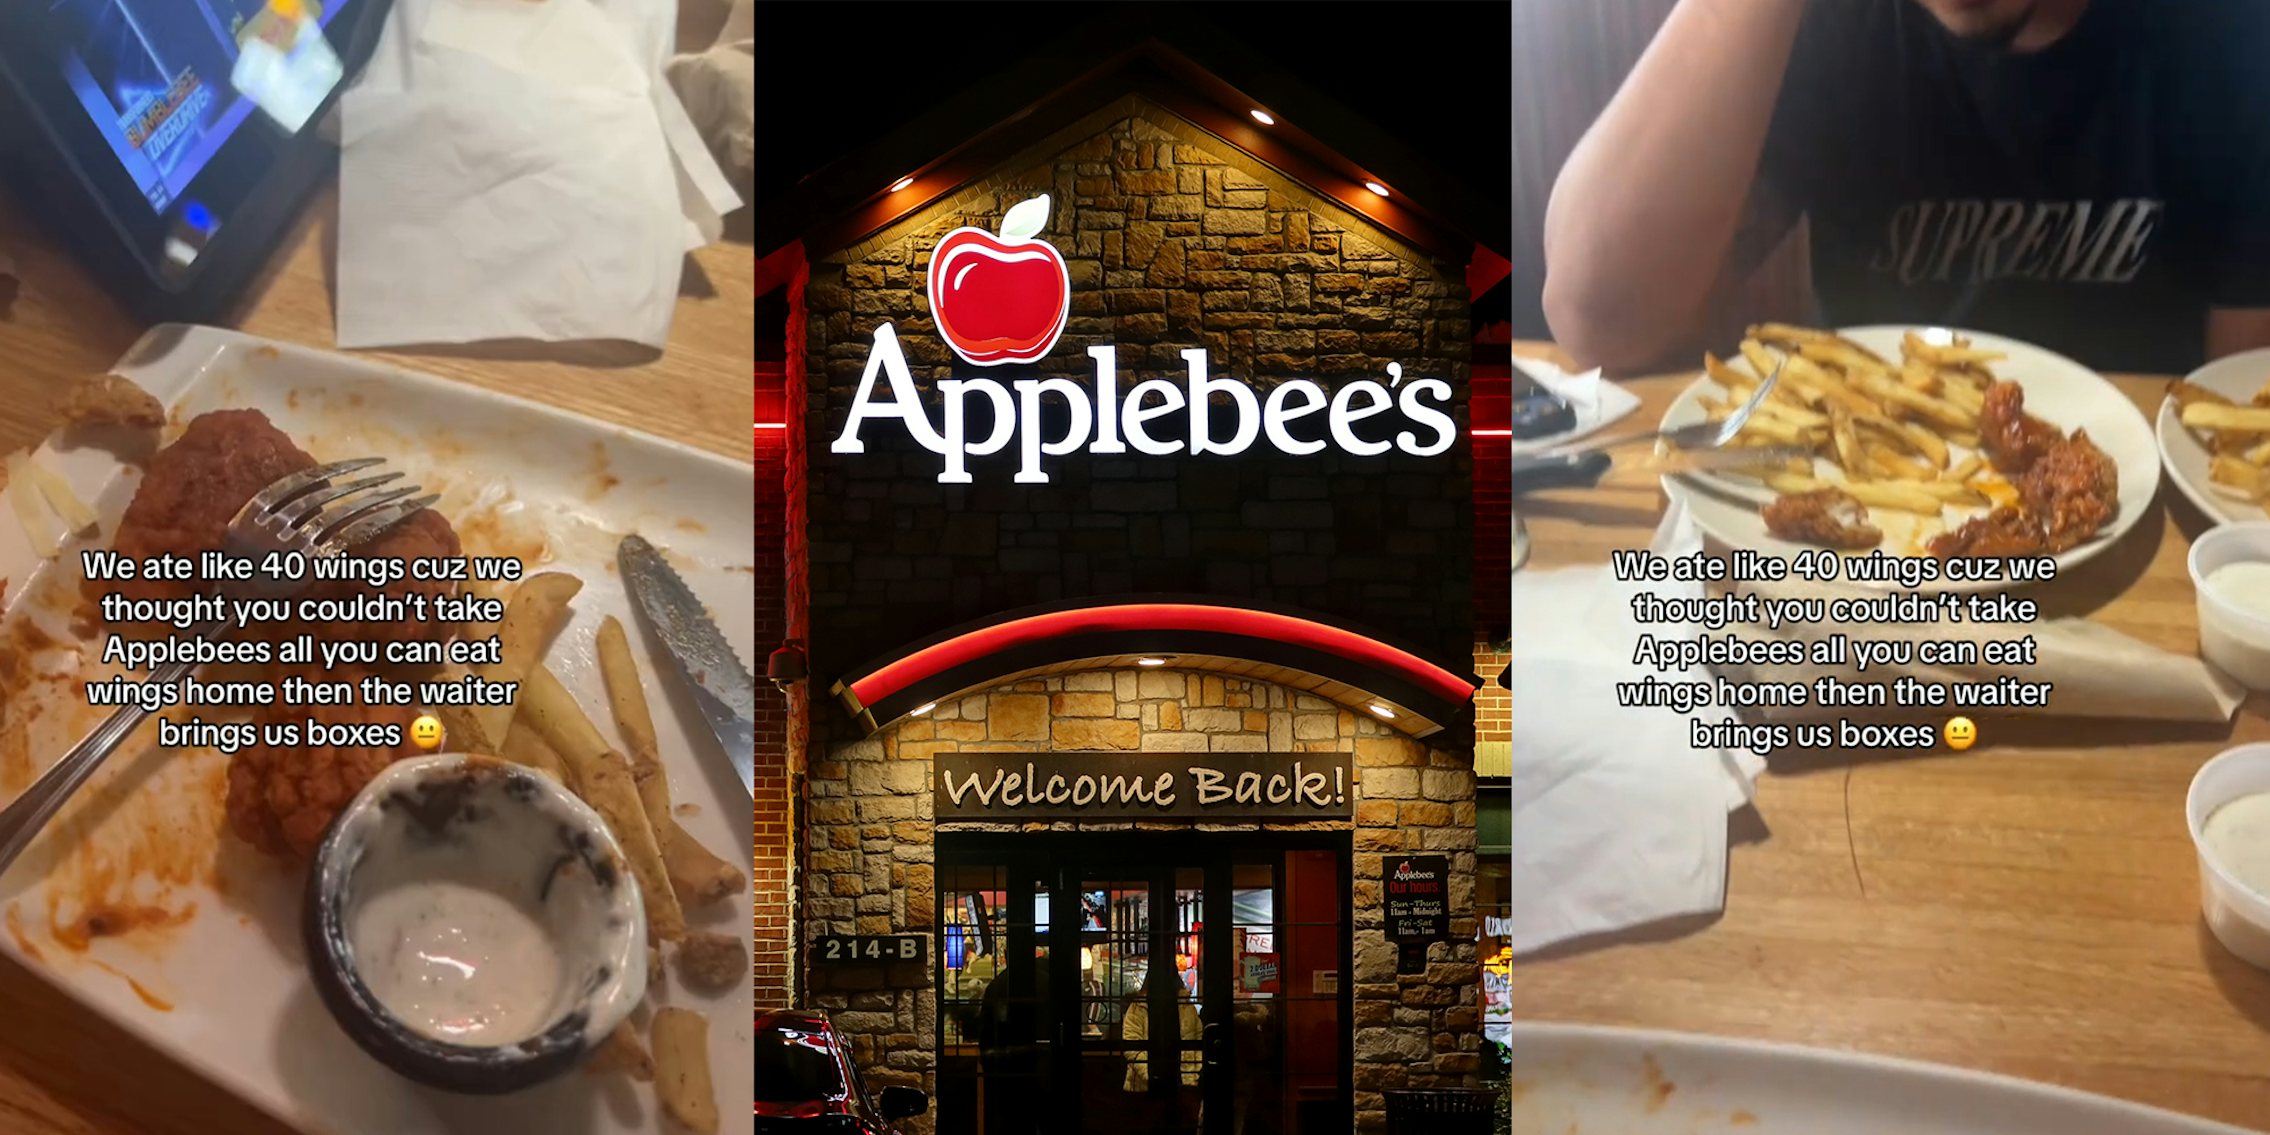 Applebee's customers force themselves to eat 40 wings, server brings out to-go box for them